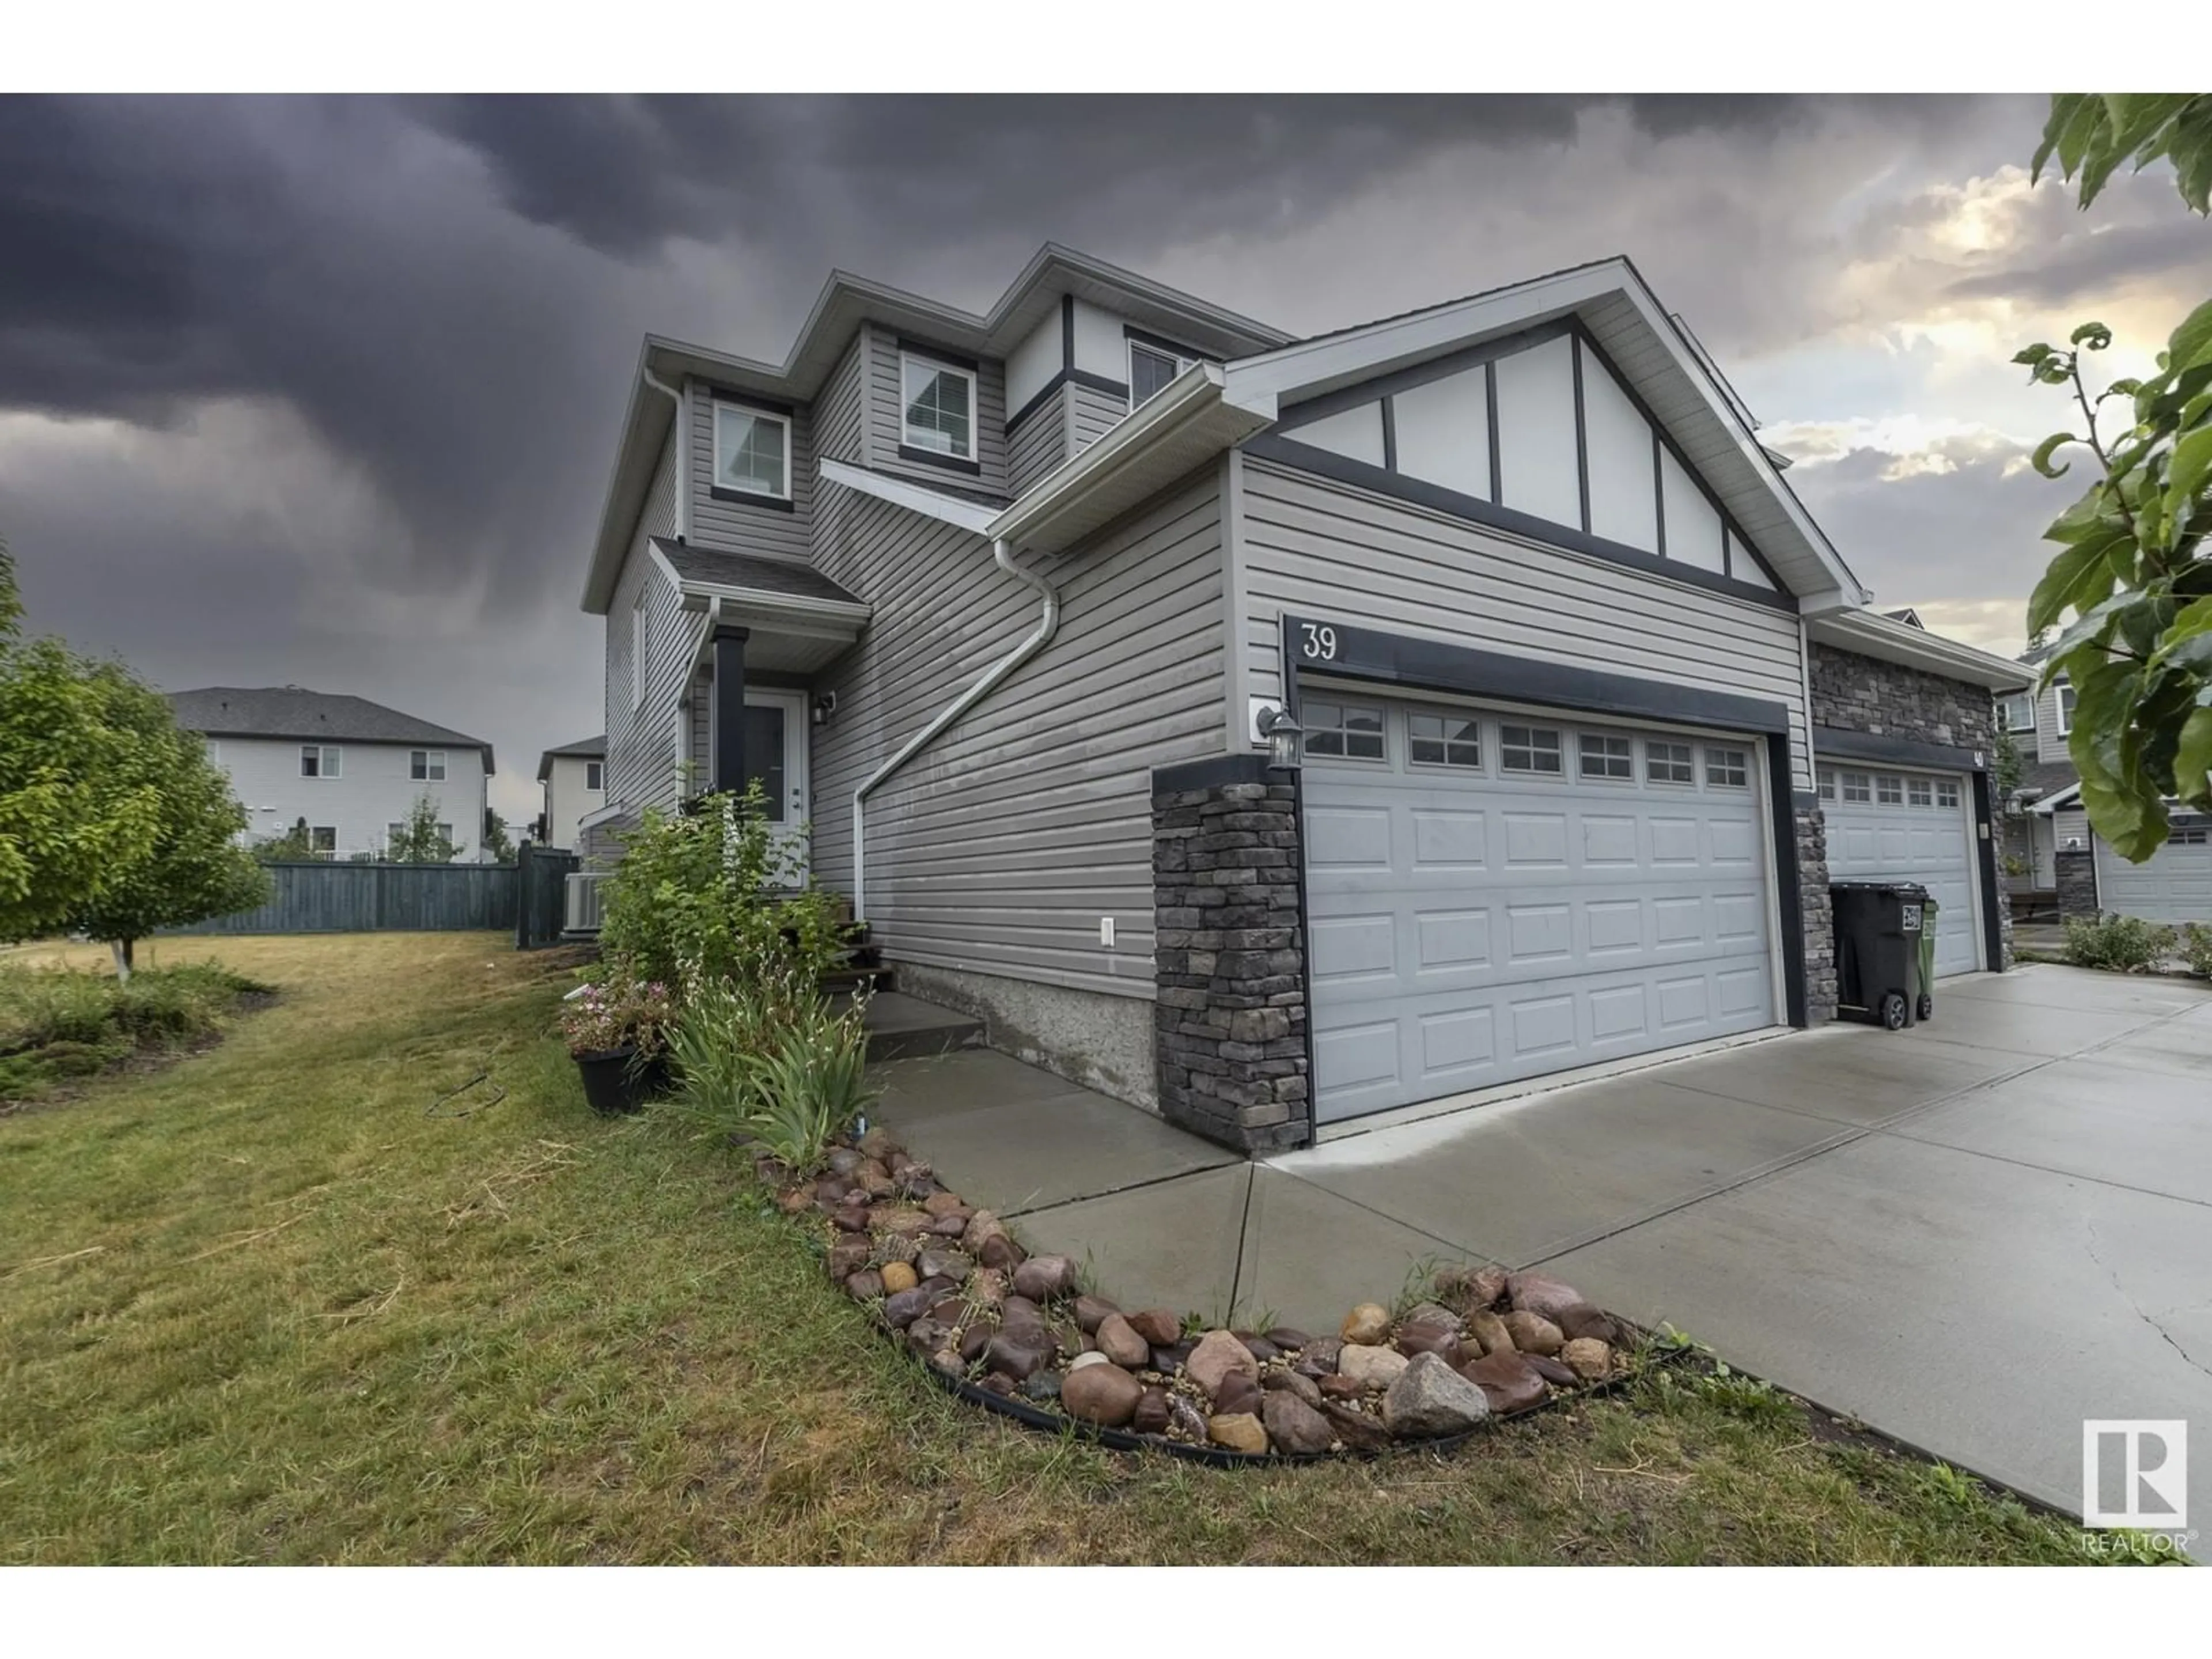 Frontside or backside of a home for #39 9350 211 ST NW, Edmonton Alberta T5T4T8